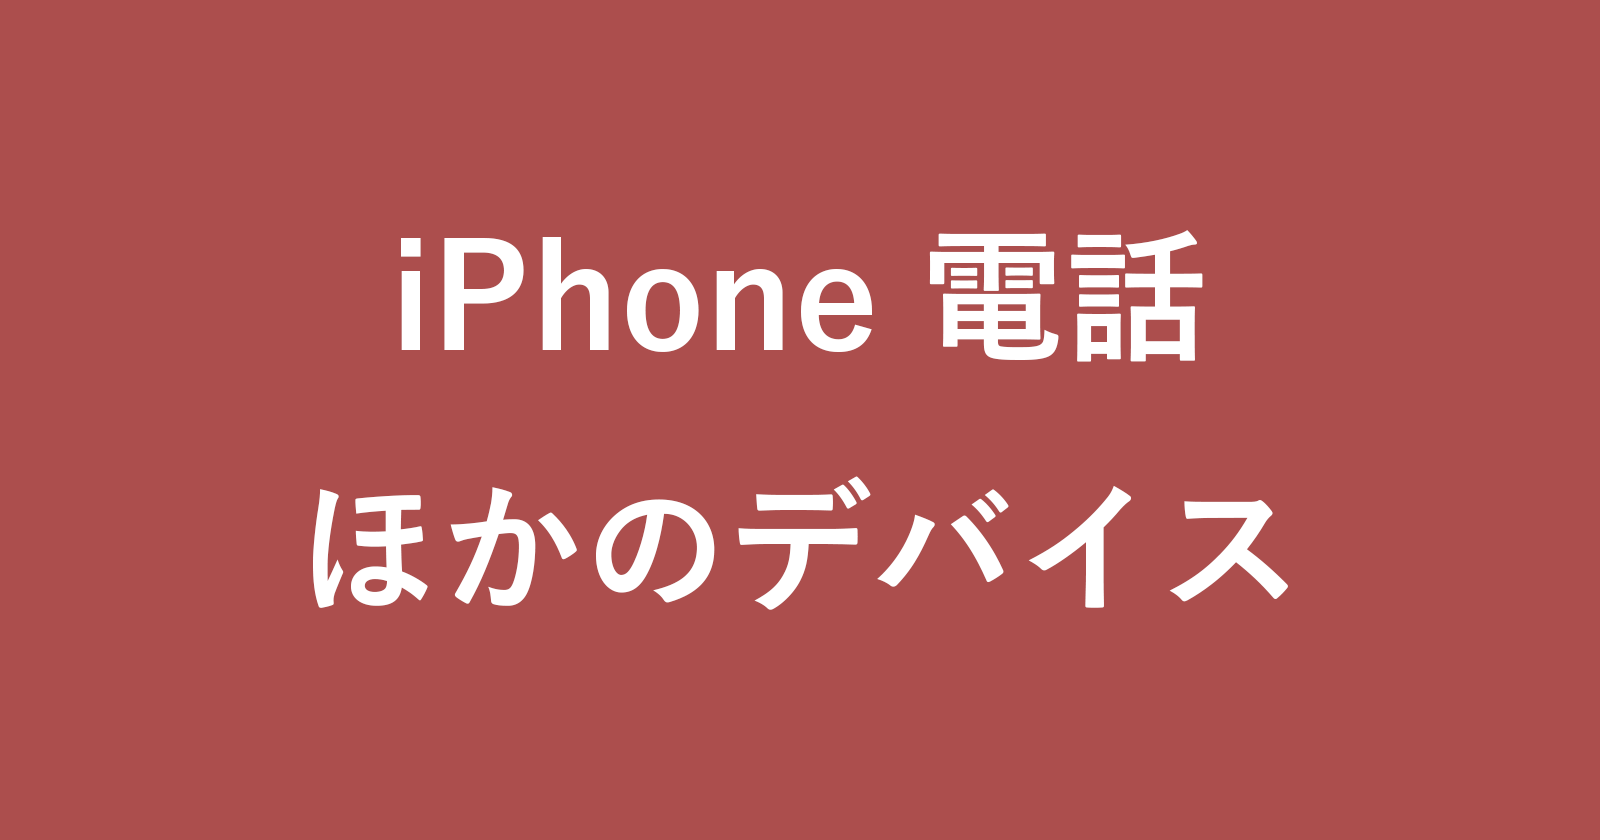 iphone call other devices